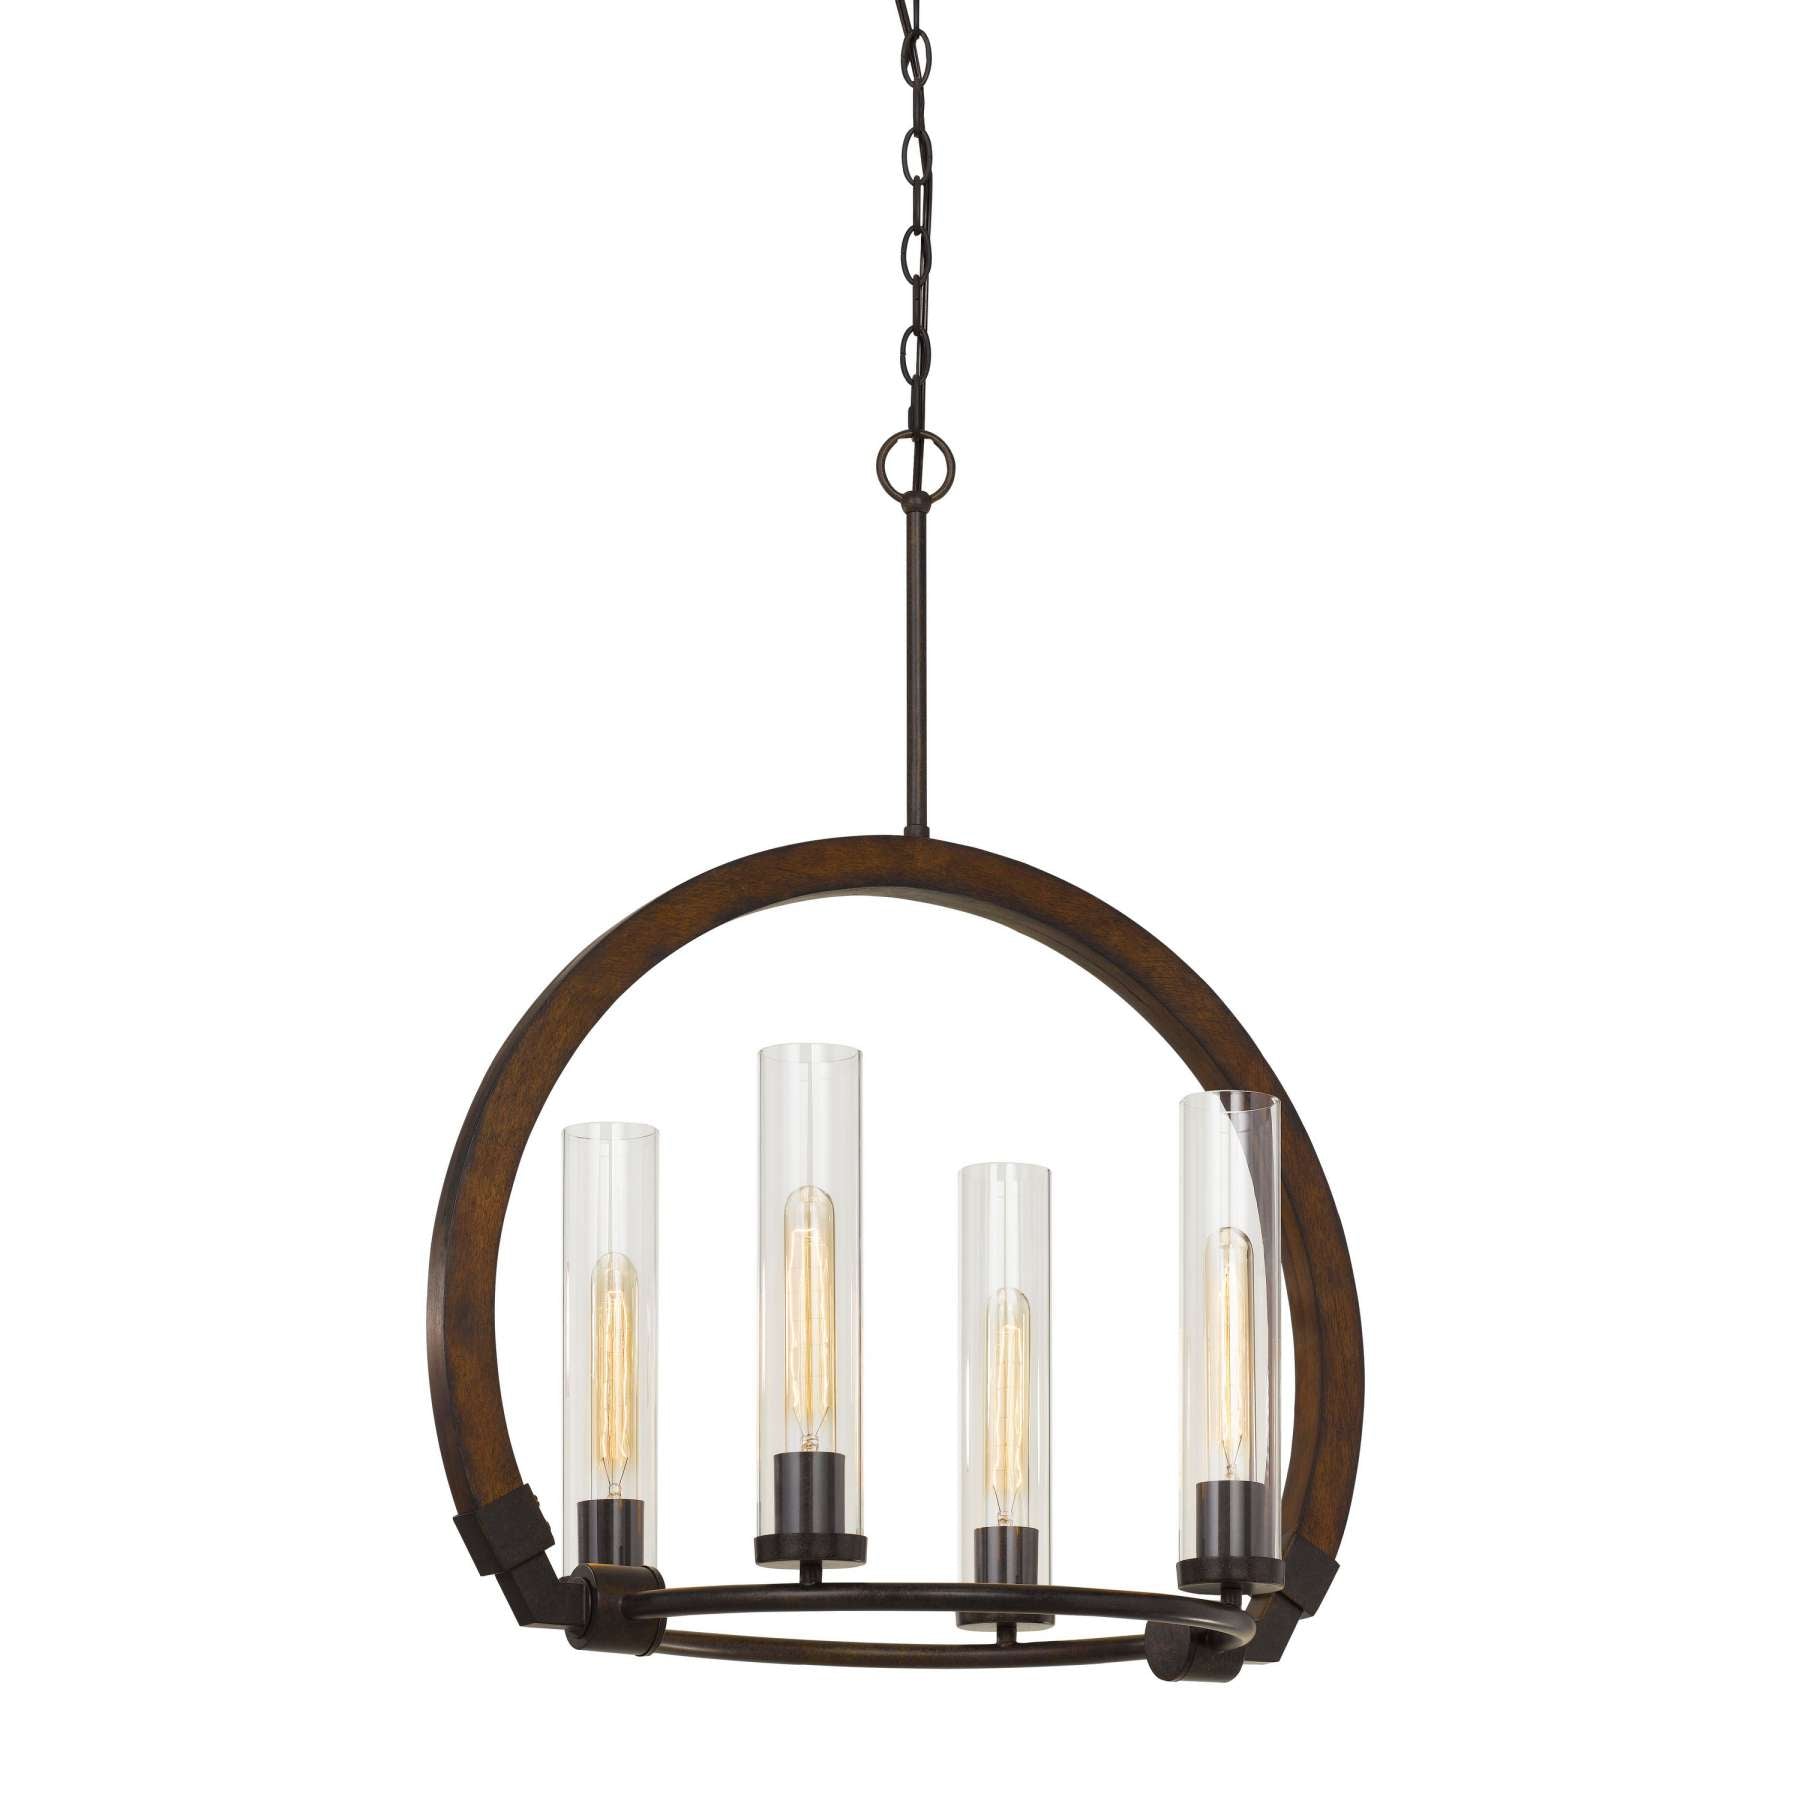 60 X 4 Watt Wood And Metal Chandelier With Glass Shade, Brown And Bronze By Benzara